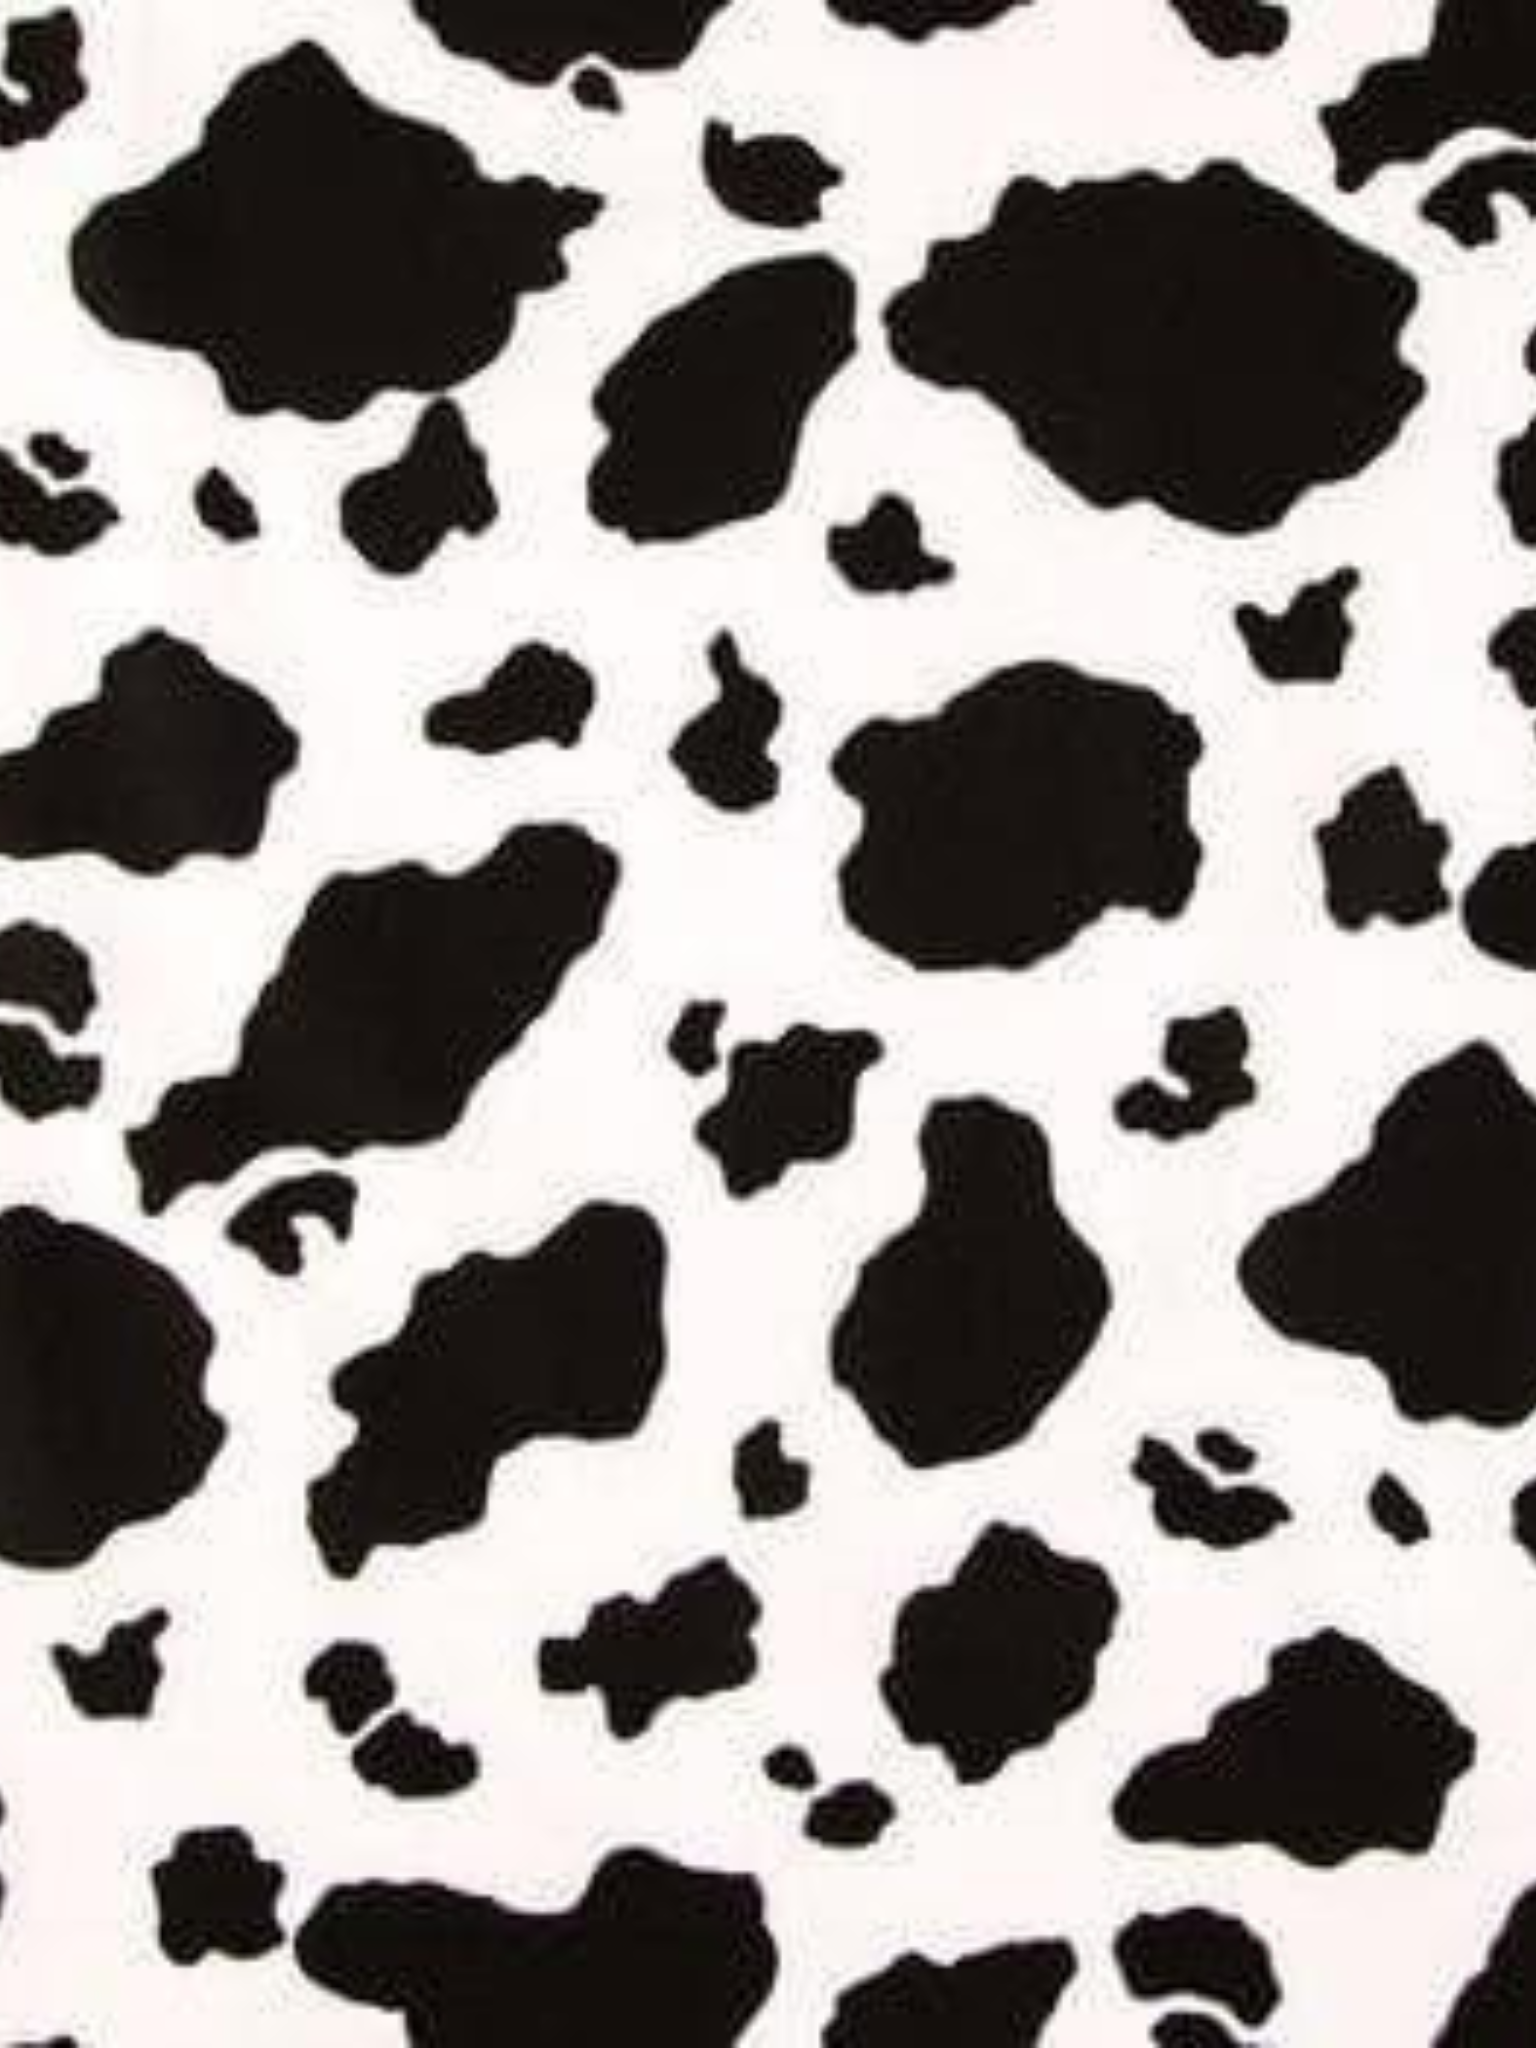 Curtain Panels or Valance - Black White Cow Print - DBC Baby Bedding Co 